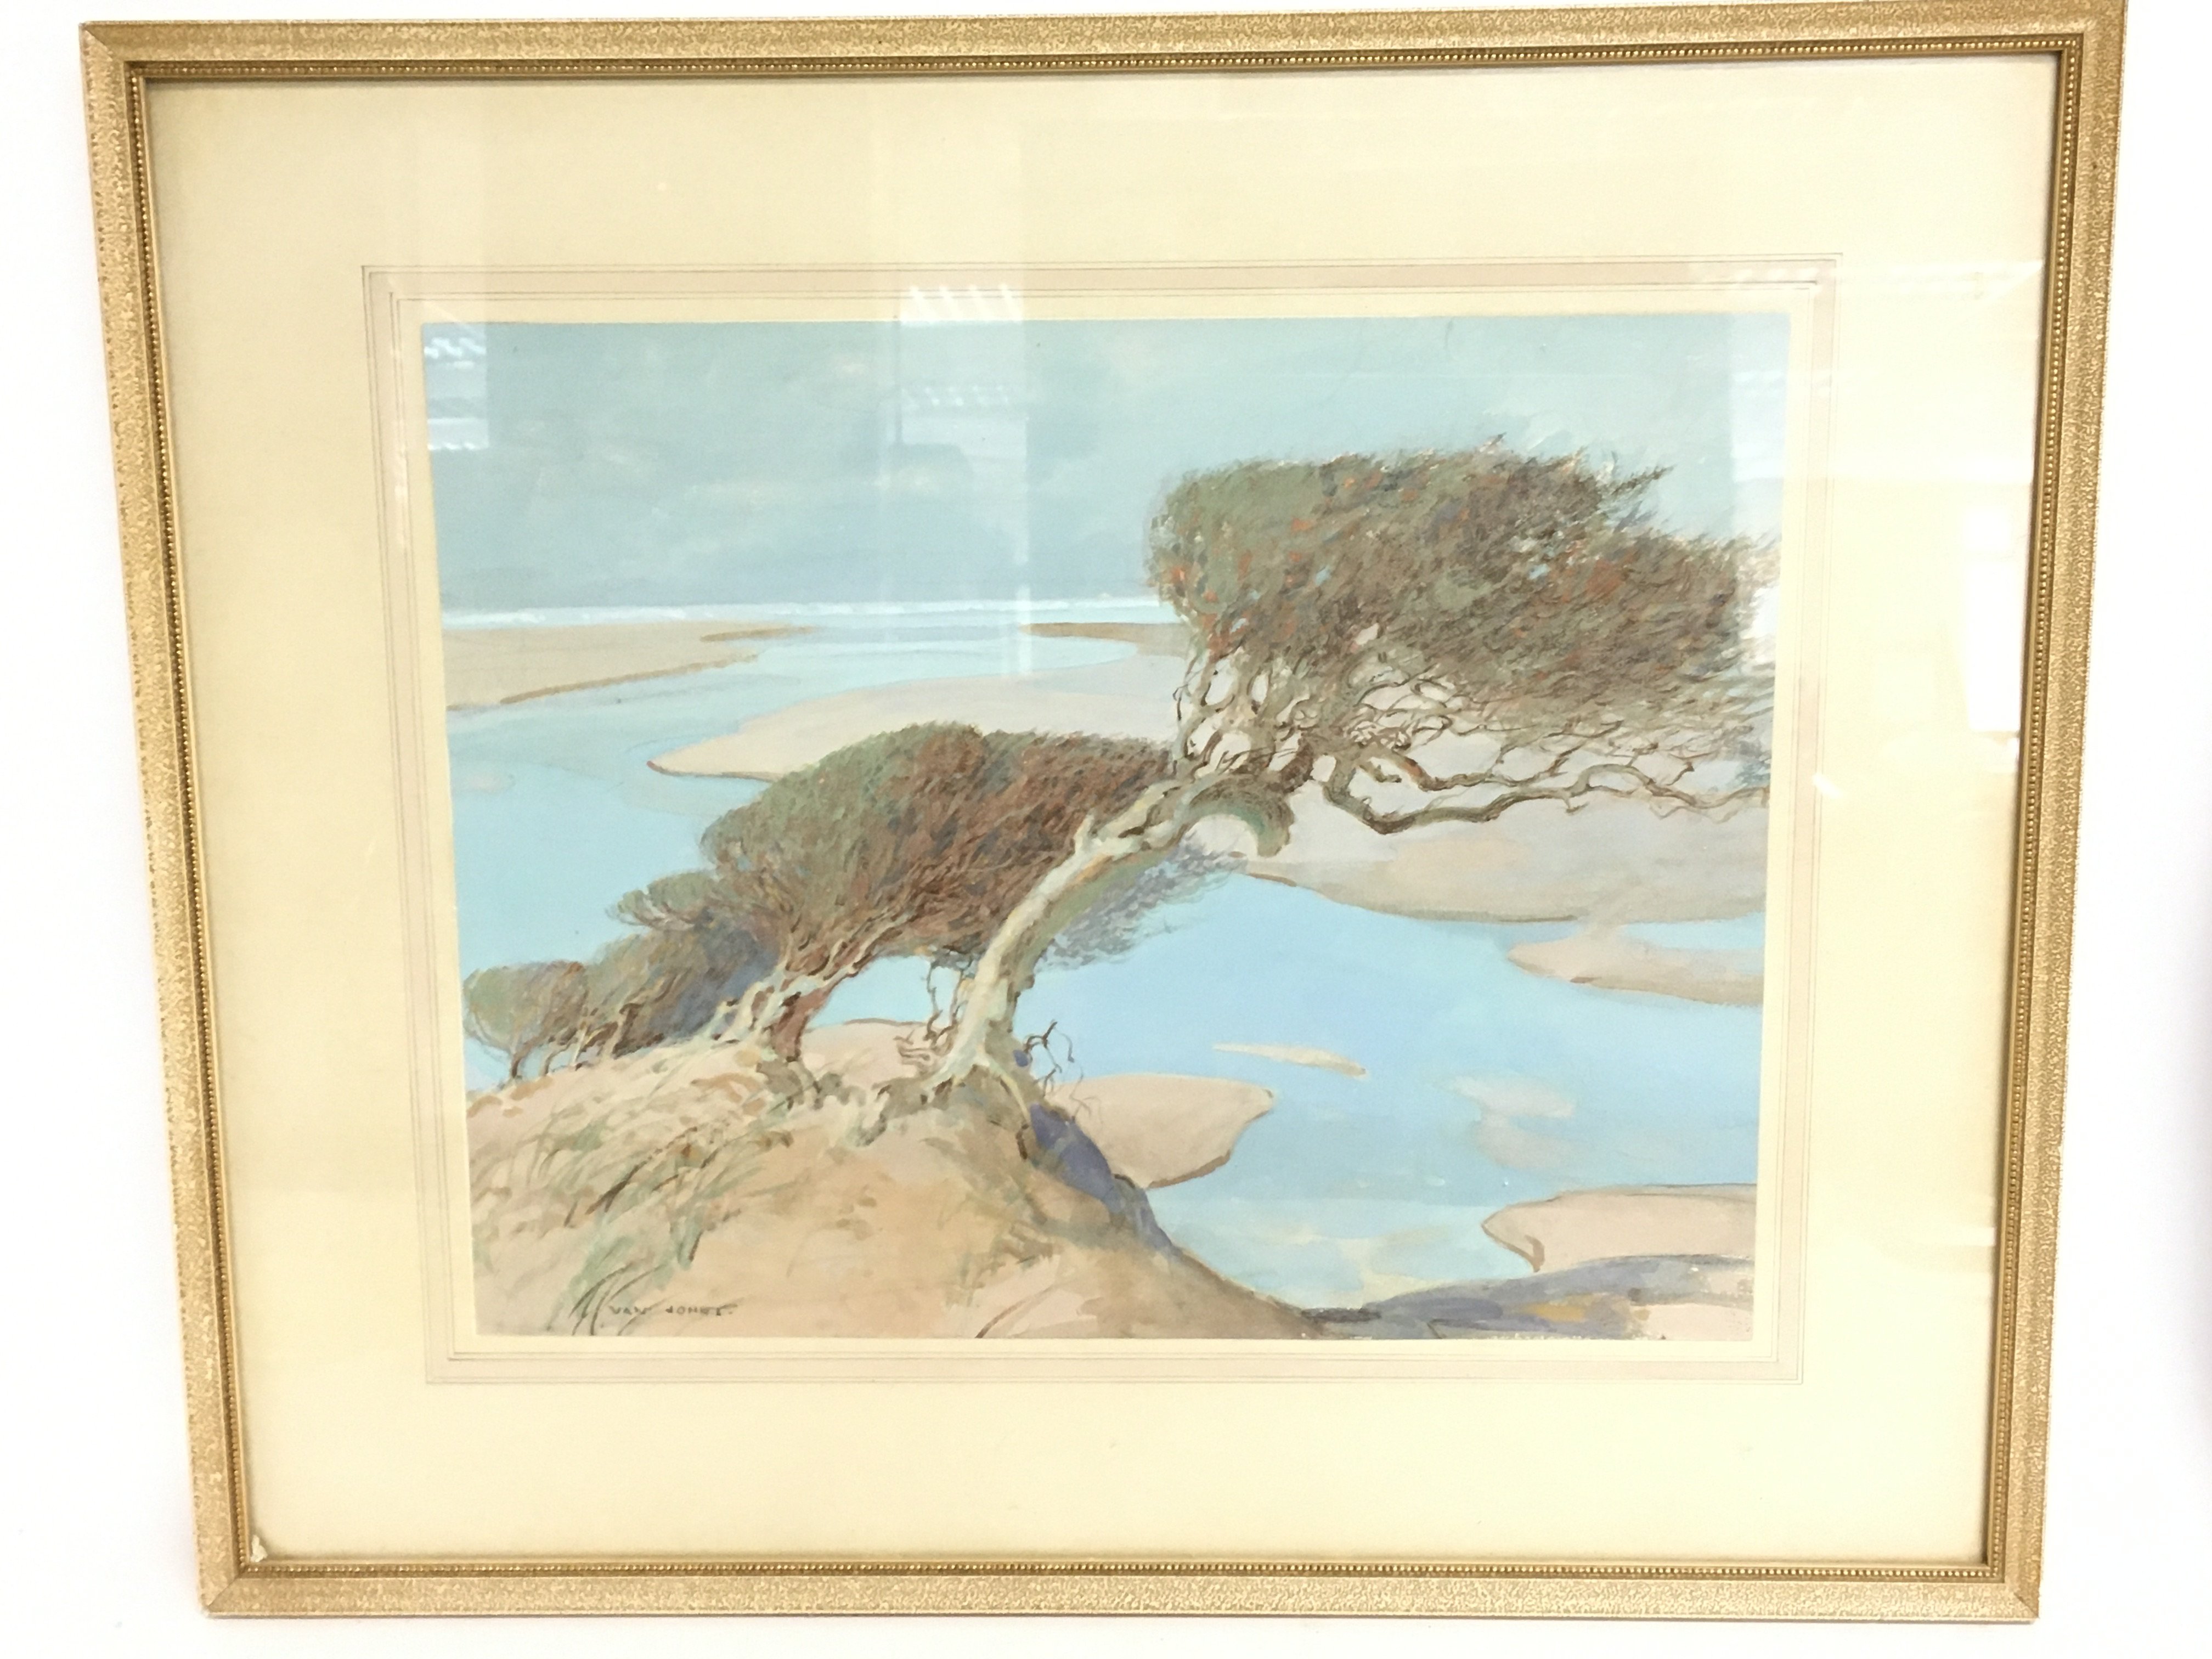 A framed watercolour painting by 20th century arti